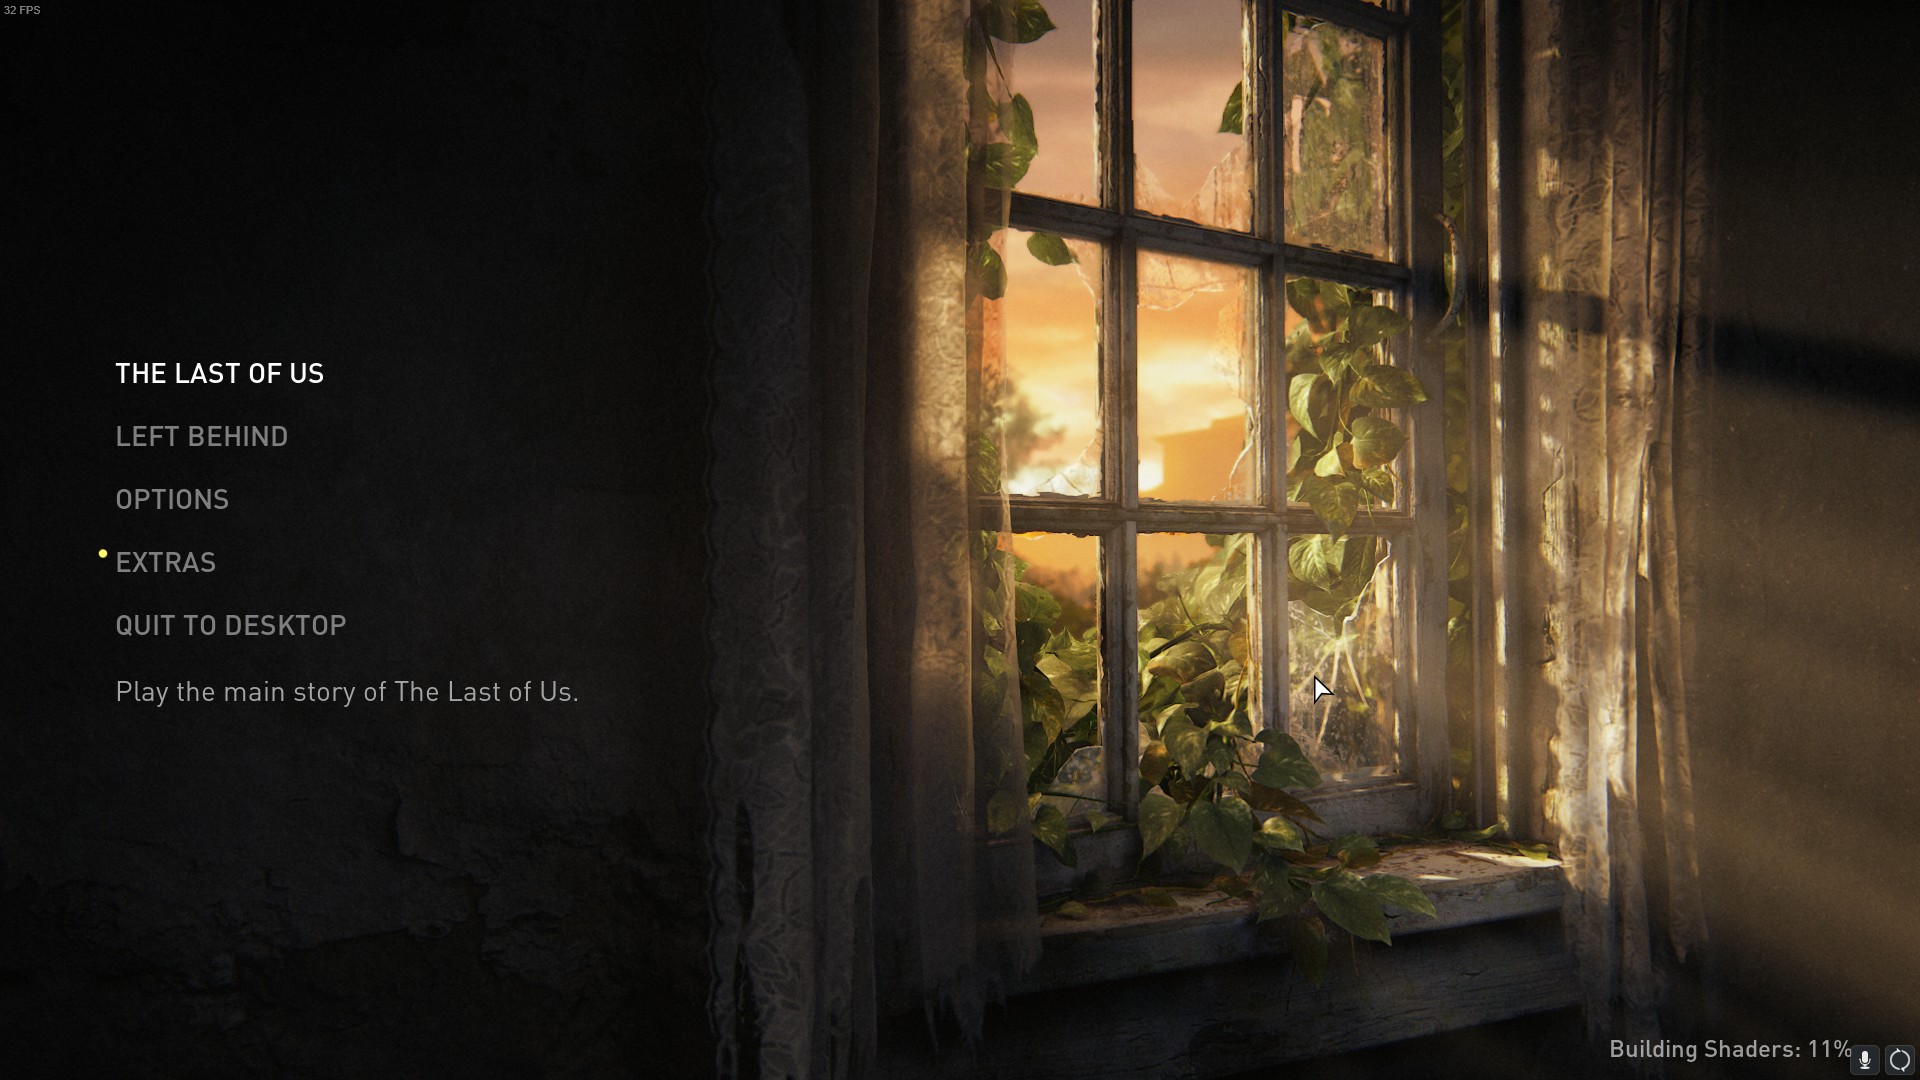 The Last of Us building shaders error